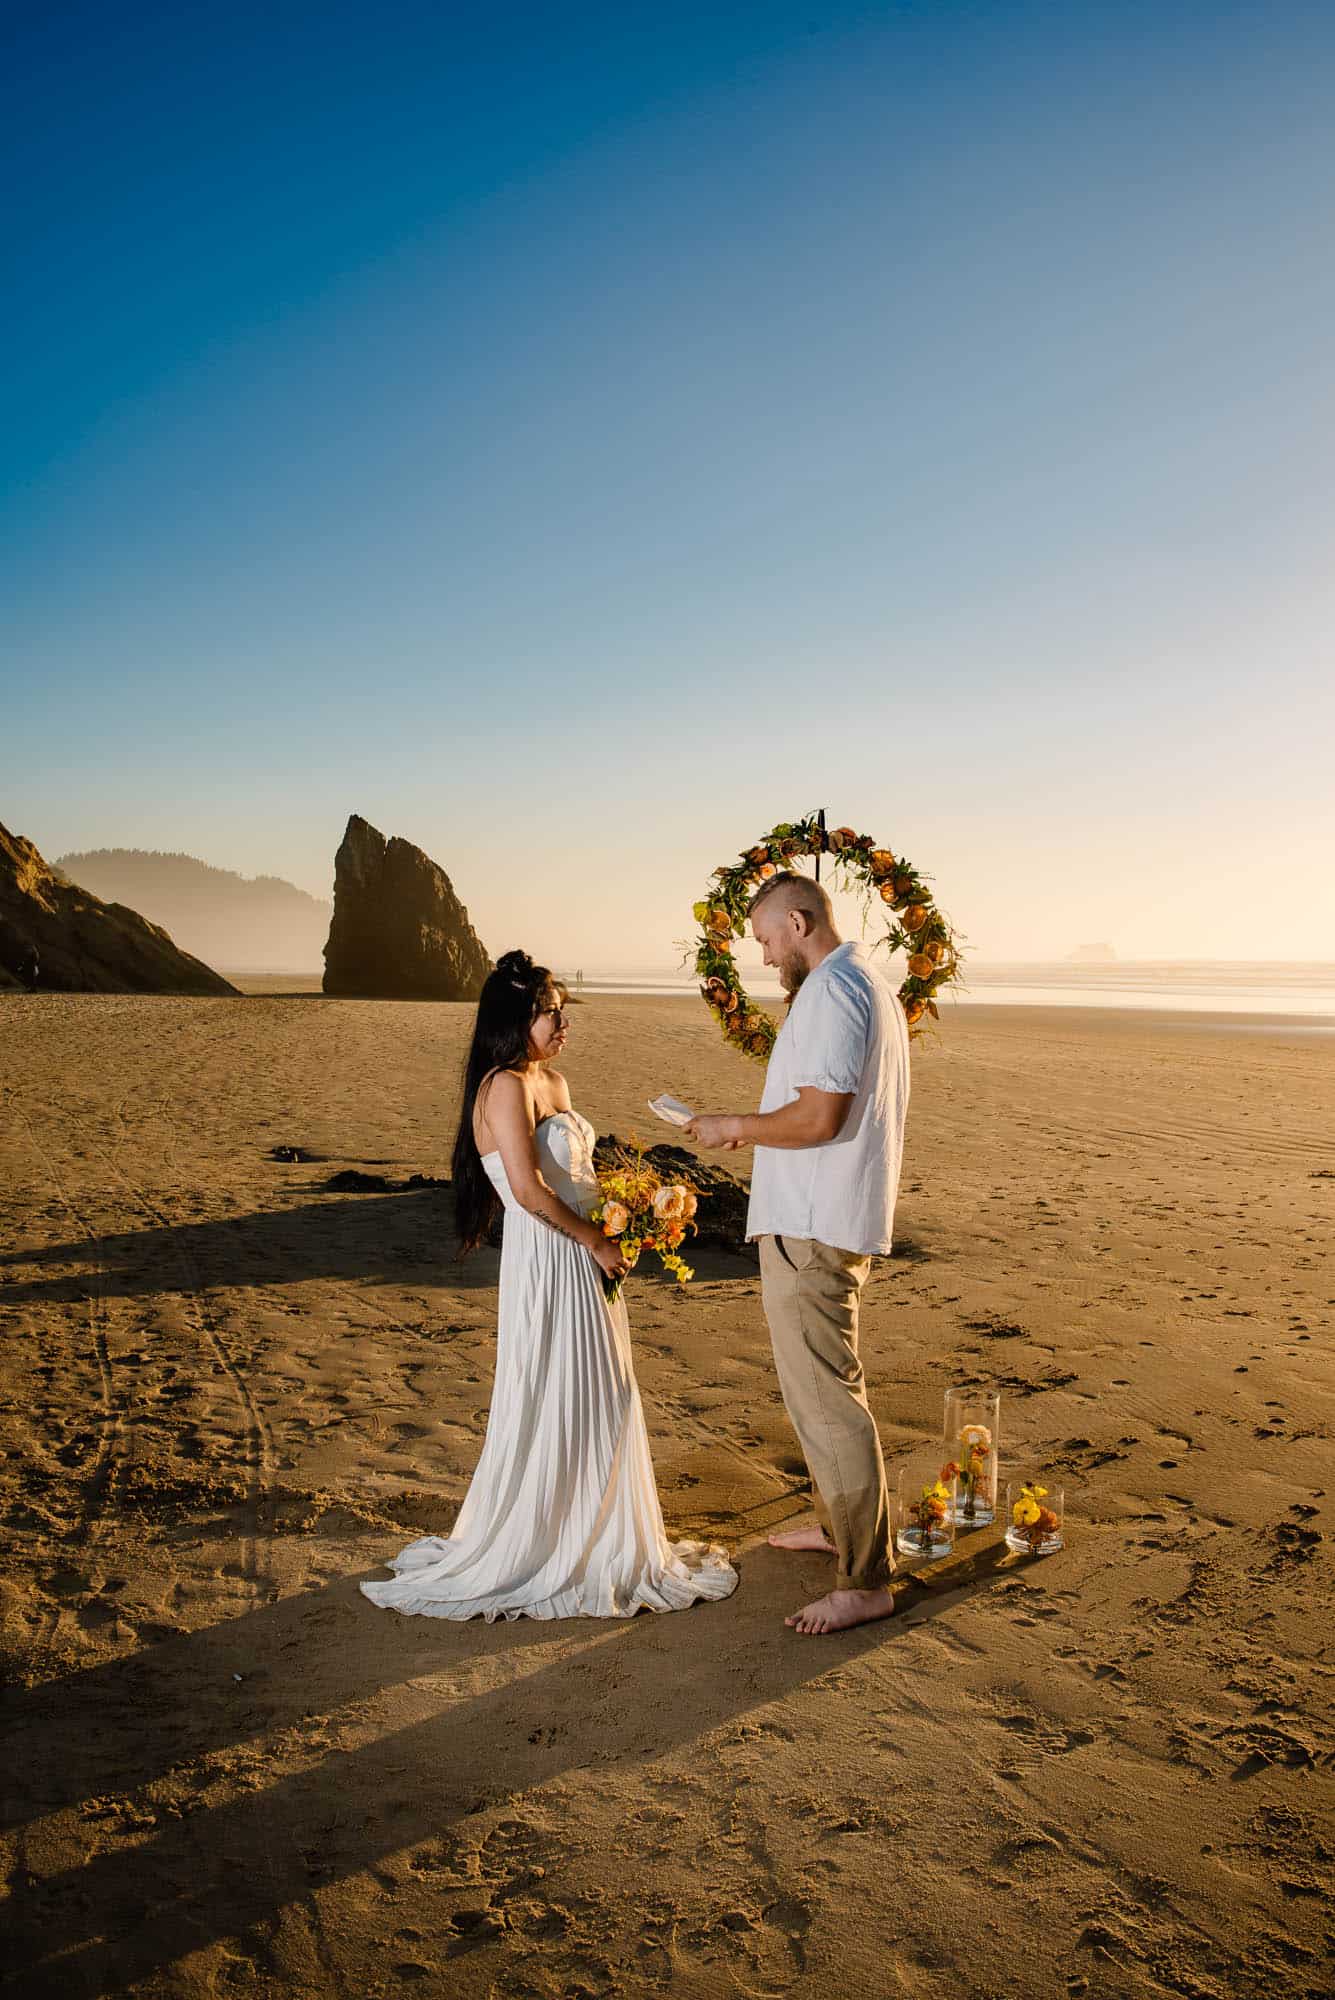 eloping couple exchanging their vows on the beach at sunset